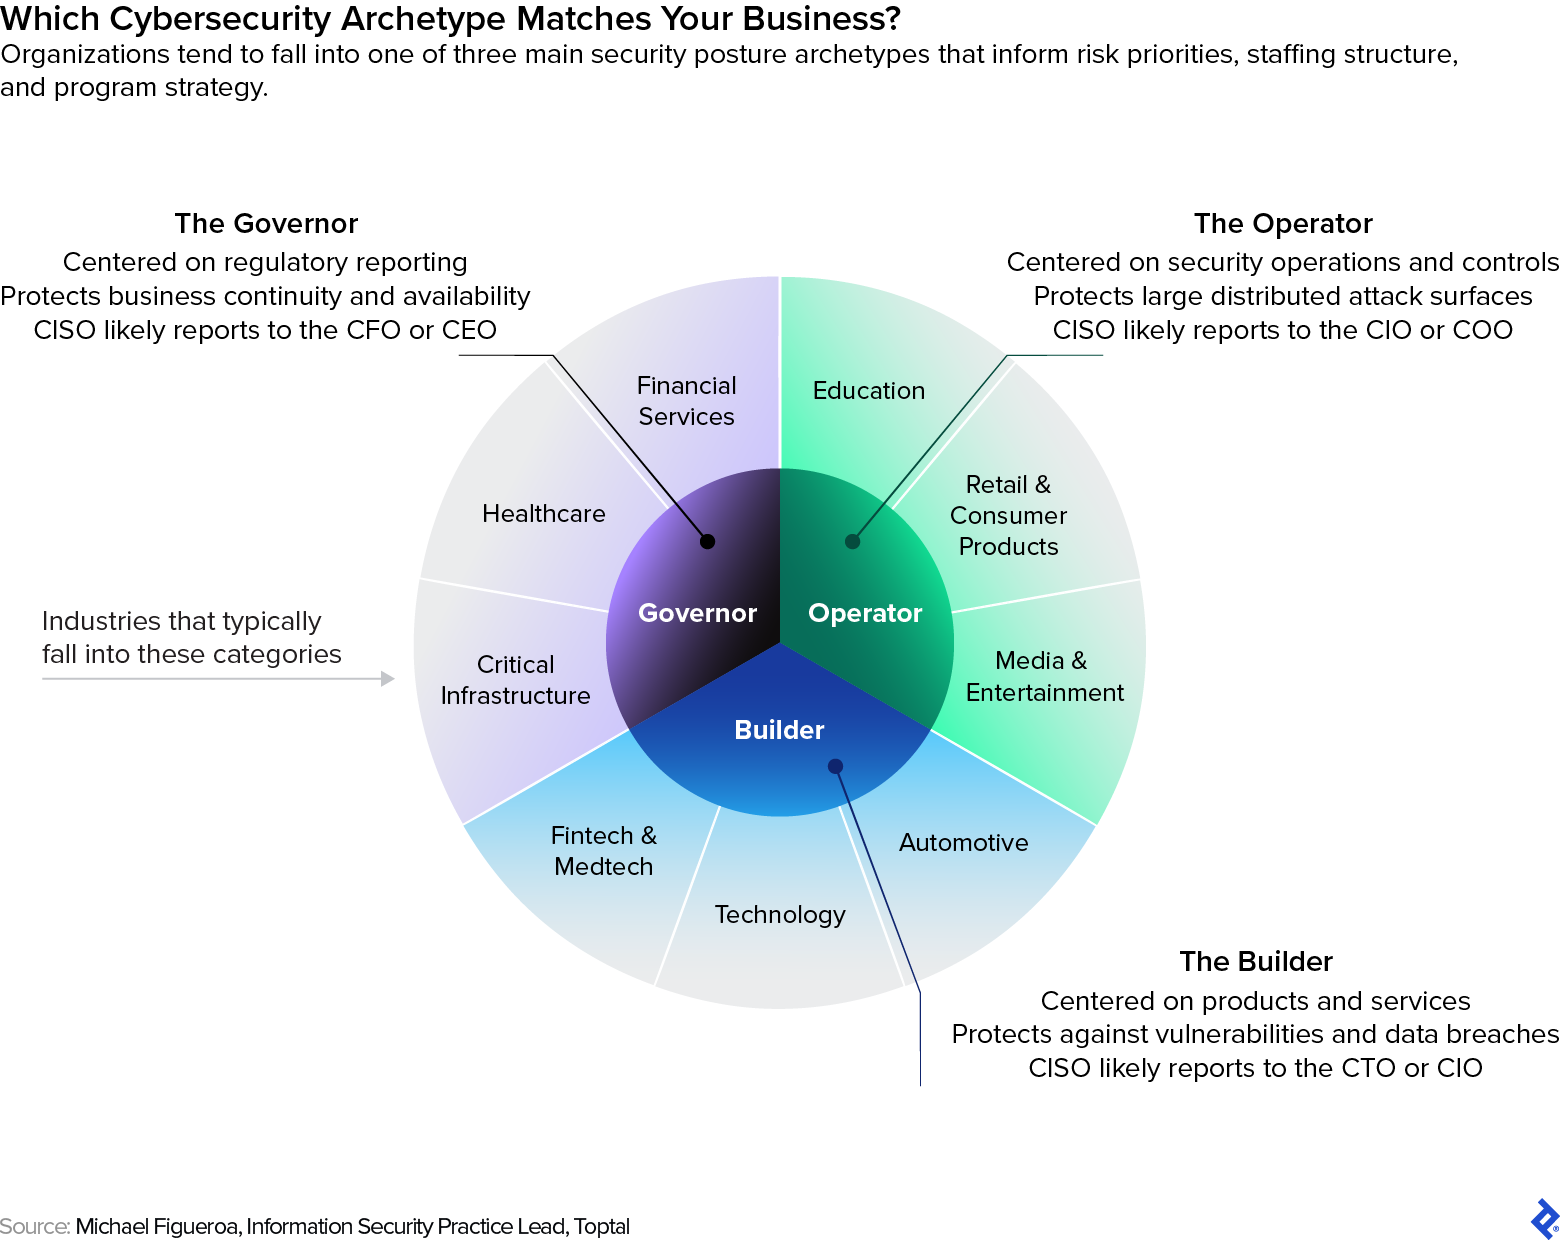 A wheel shows three main cybersecurity archetypes: operator, builder, and governor; and gives examples of the types of industries they often comprise.